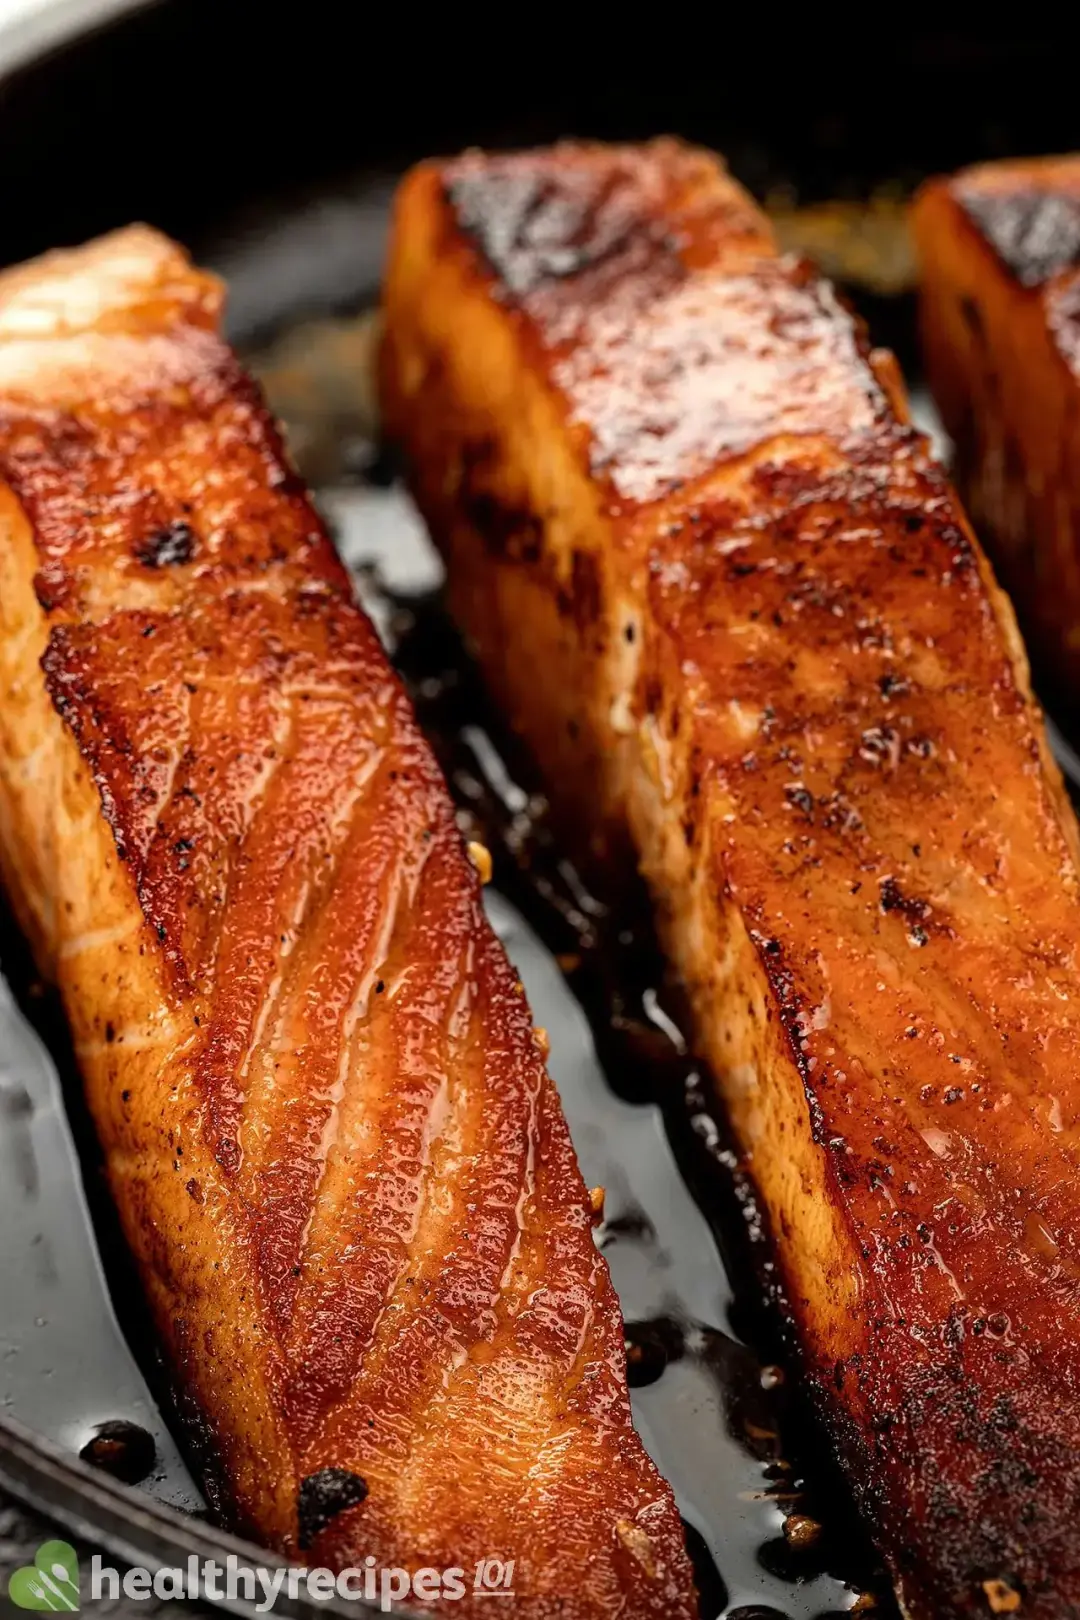 A close-up shot of pan-seared salmons that are brown, glossy, and have charred edges